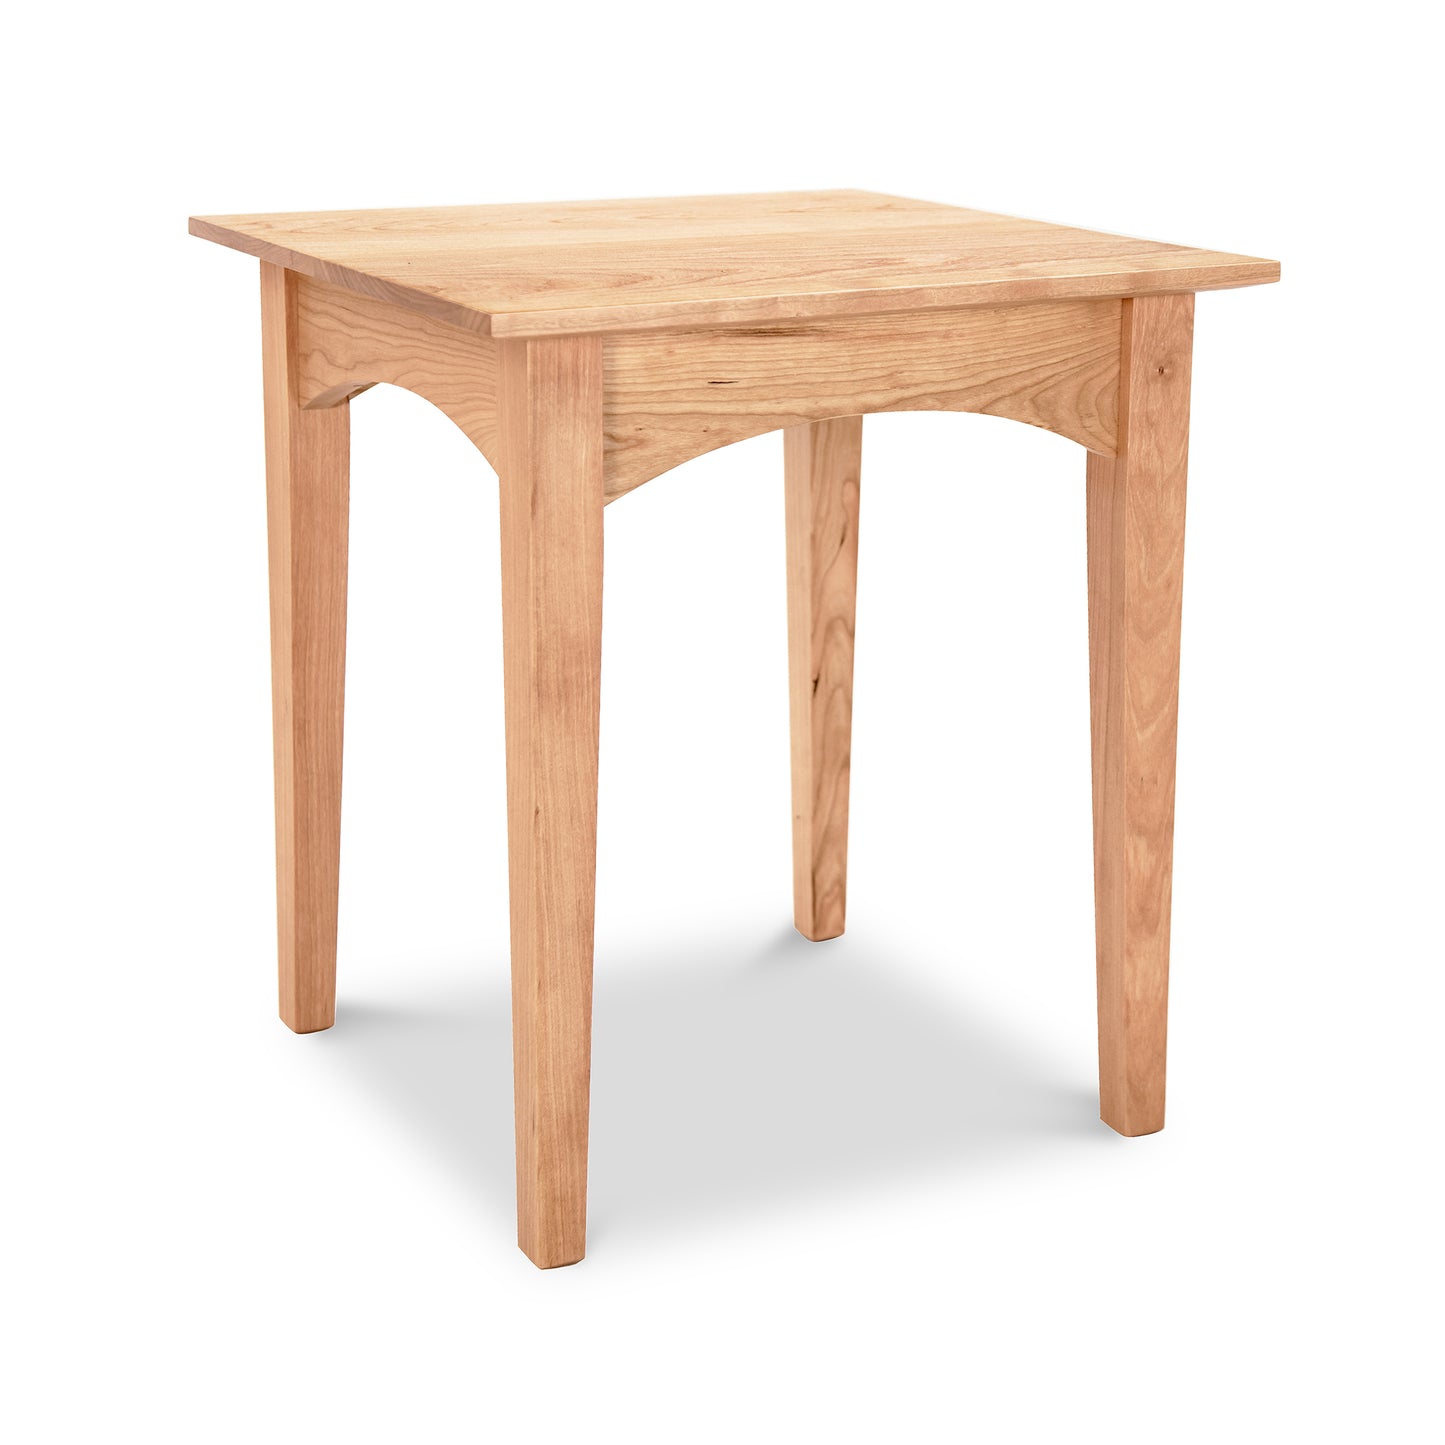 An American Shaker End Table with solid natural cherry top and legs, crafted using Maple Corner Woodworks traditional craftsmanship.